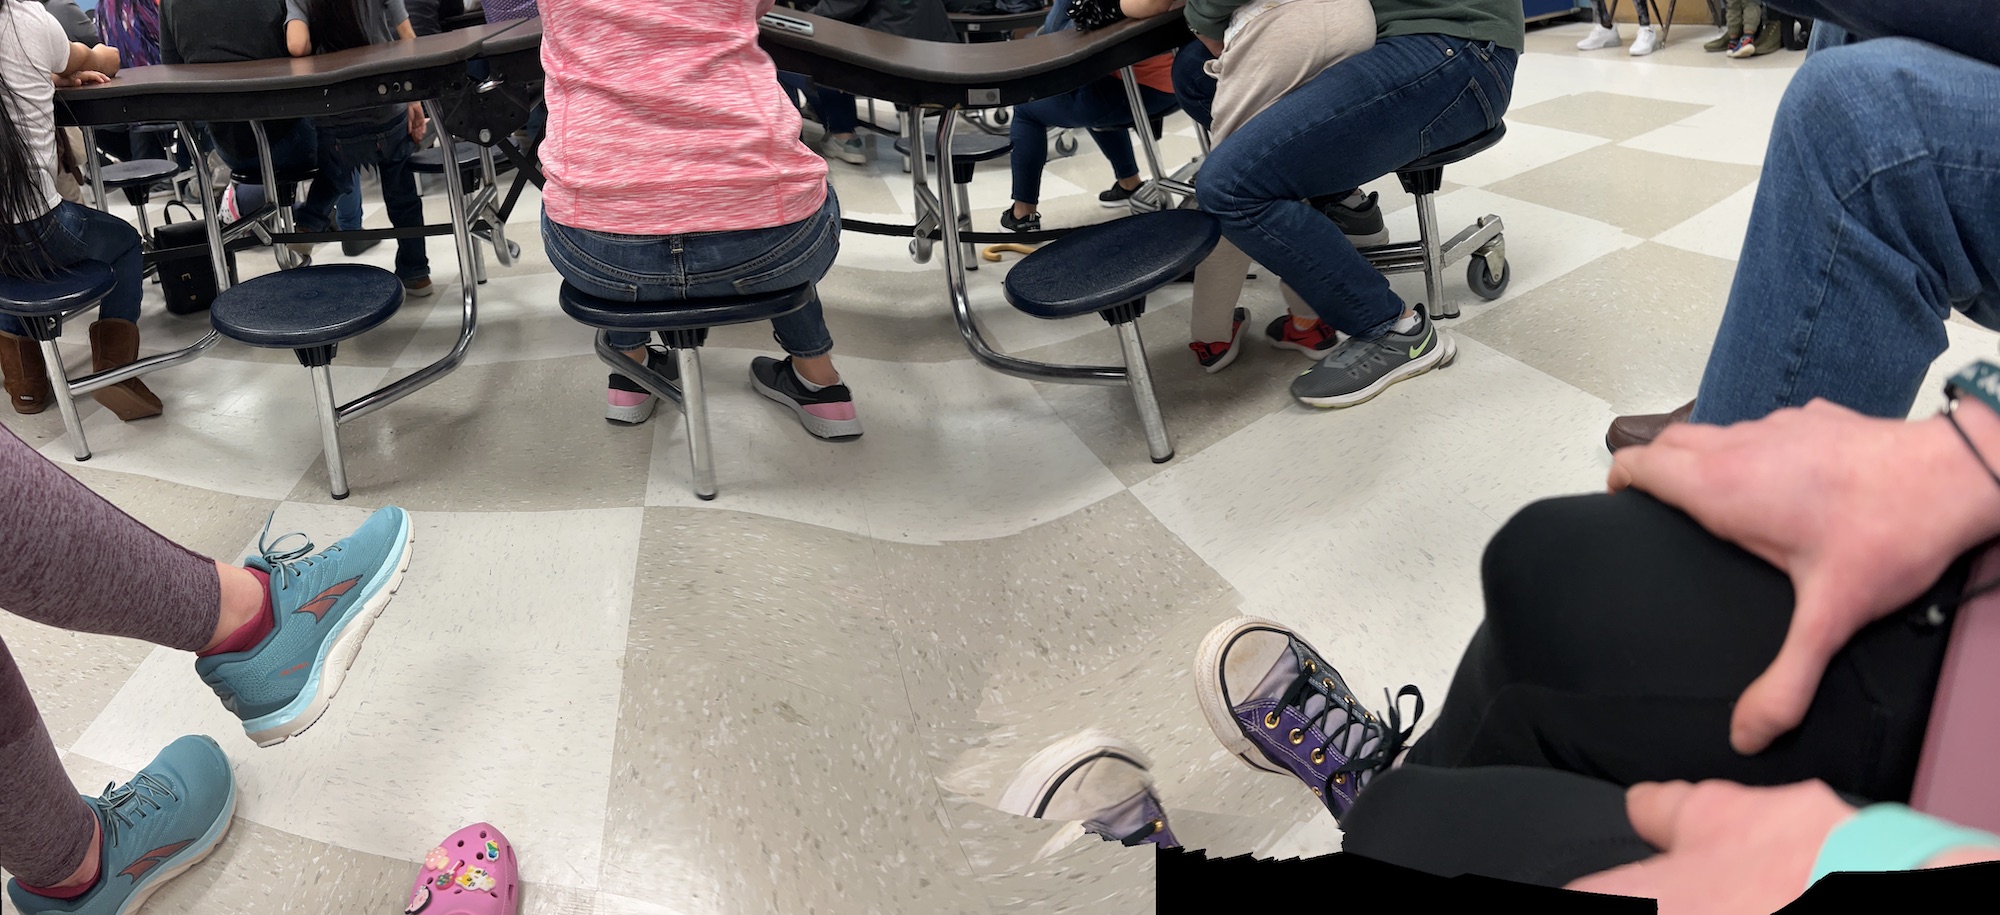 Feet of 4 family members in an elementary cafeteria. 